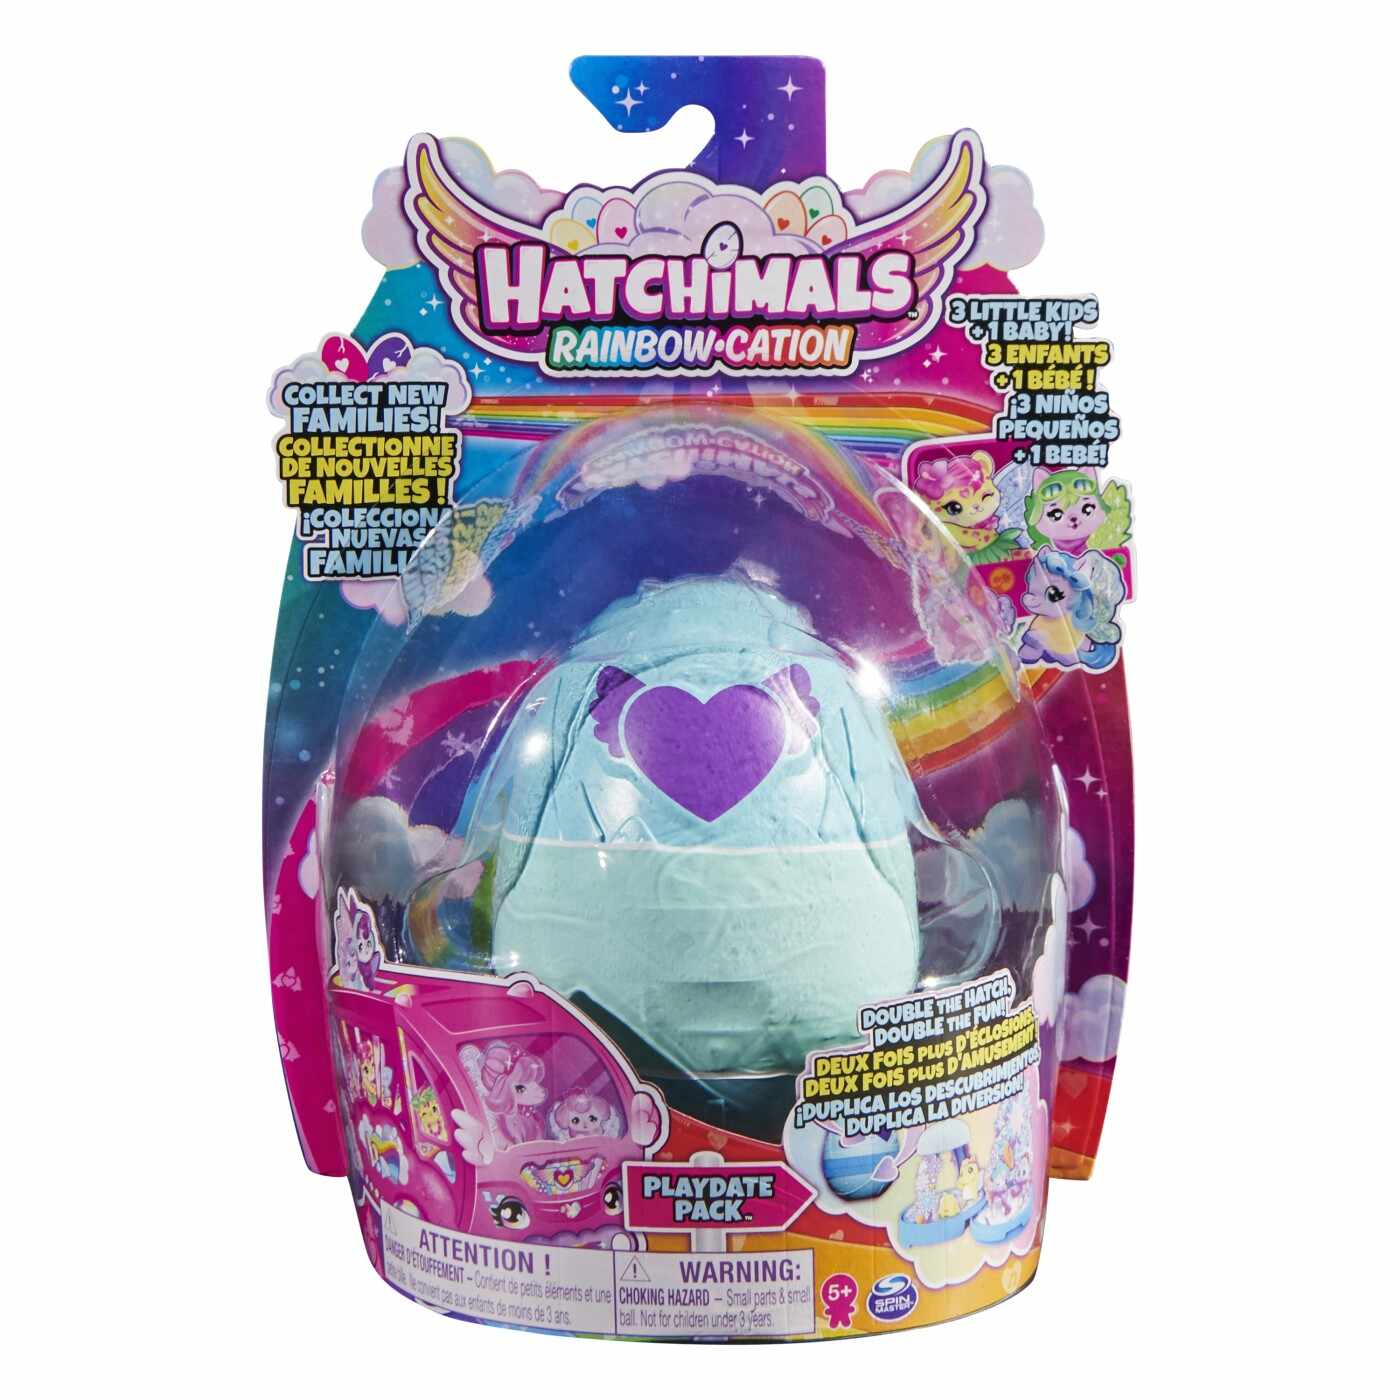 Figurina - Hatchimals Rainbow-Cation - Collect New Families! (surpriza) | Spin Master